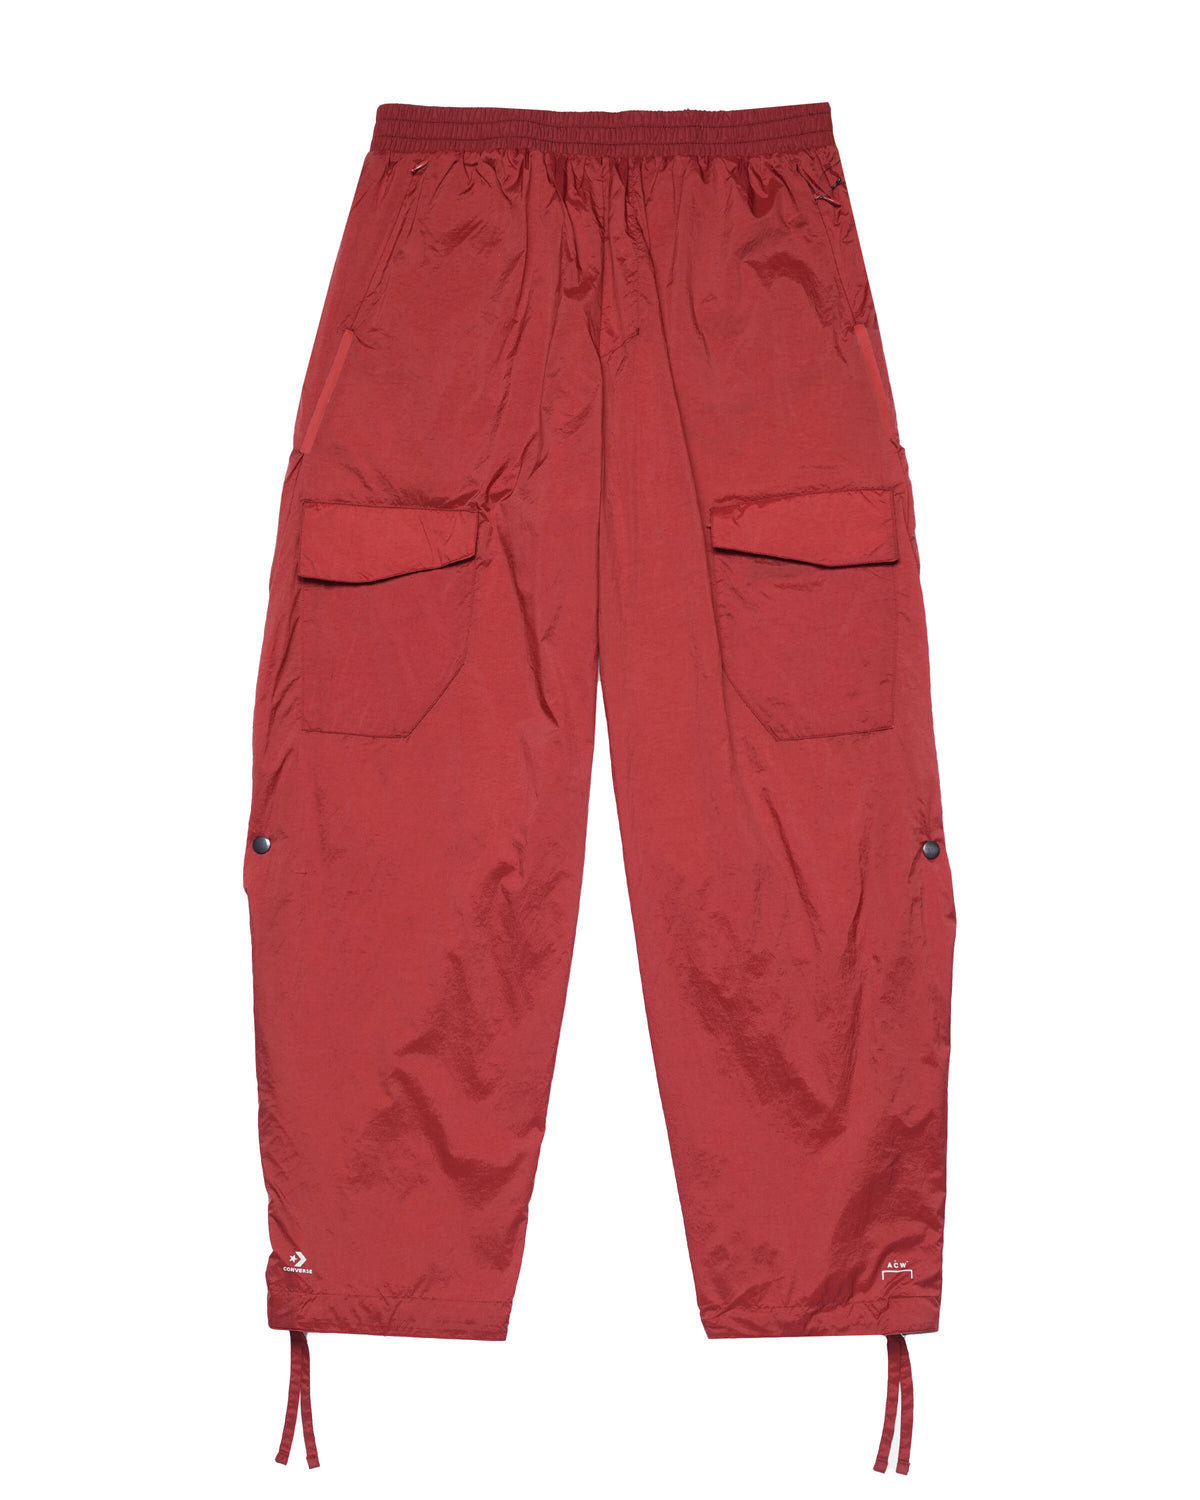 Converse x A-COLD-WALL* Reversible WIND PANT